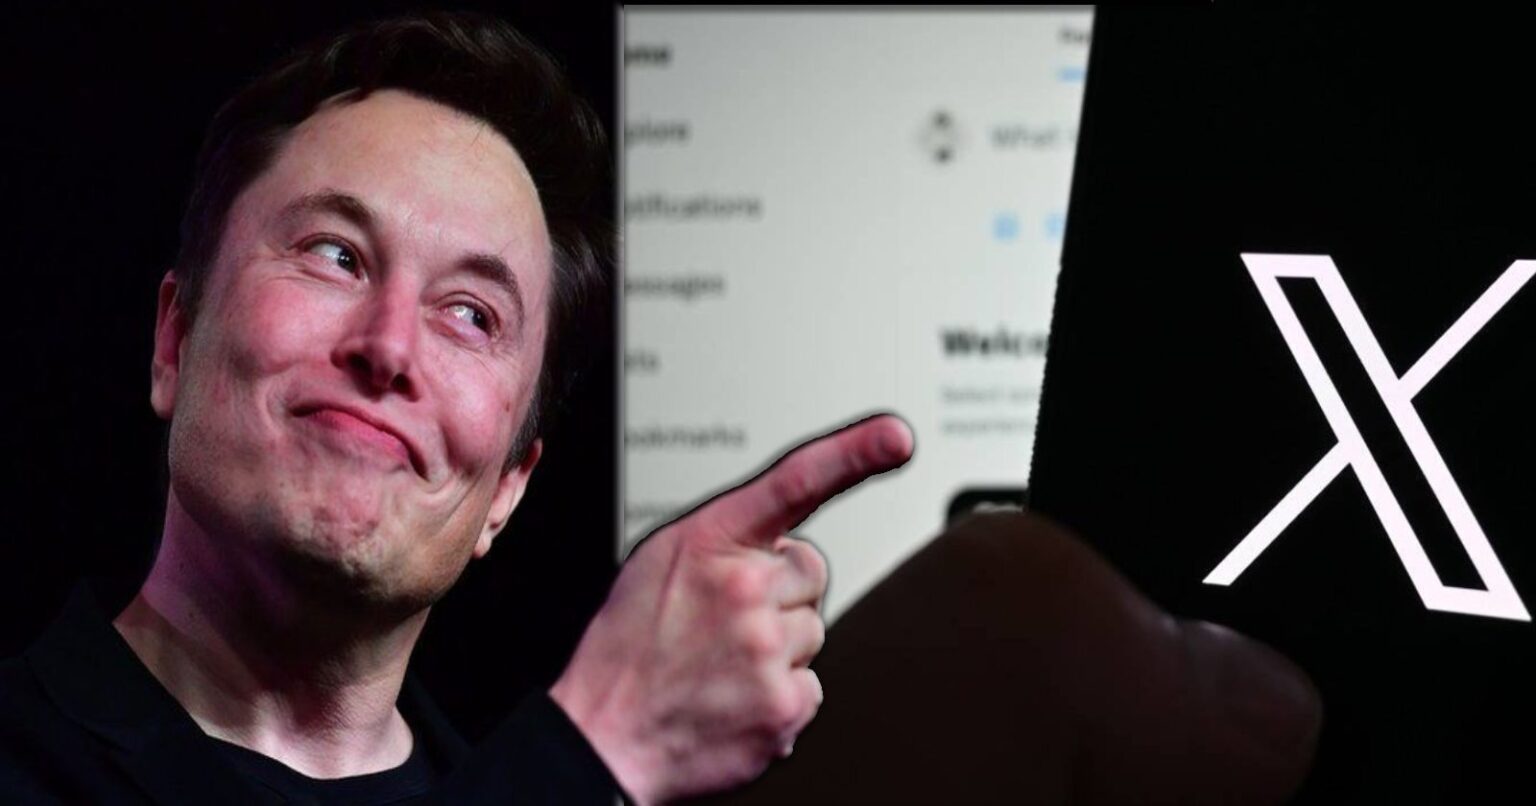 Interesting post from Elon Musk! Did X outperform its competitors?